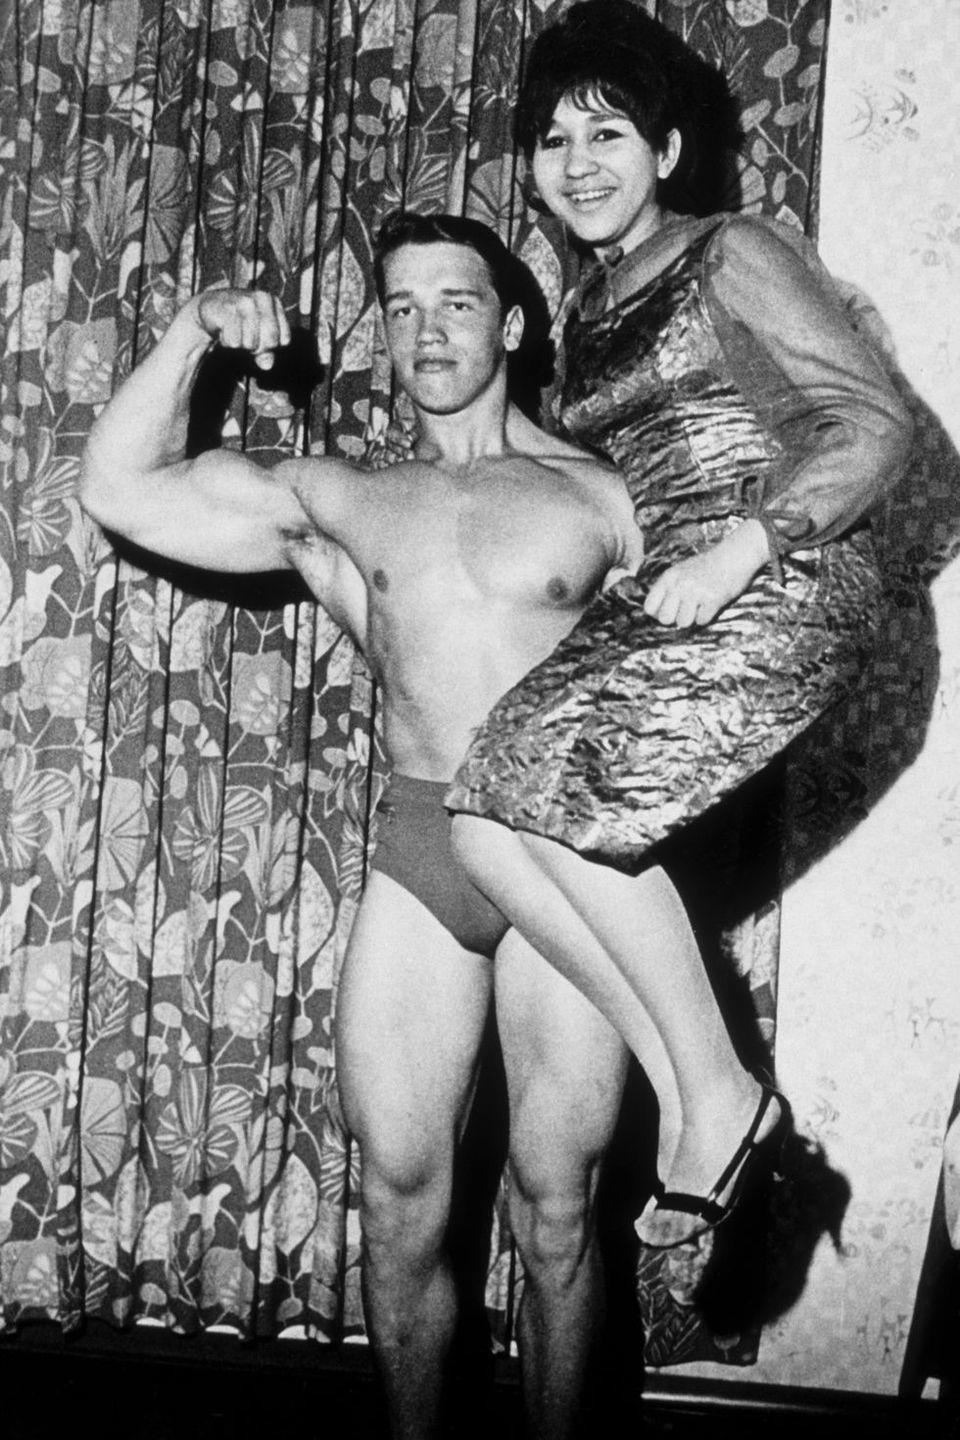 1965: Becoming a Bodybuilder